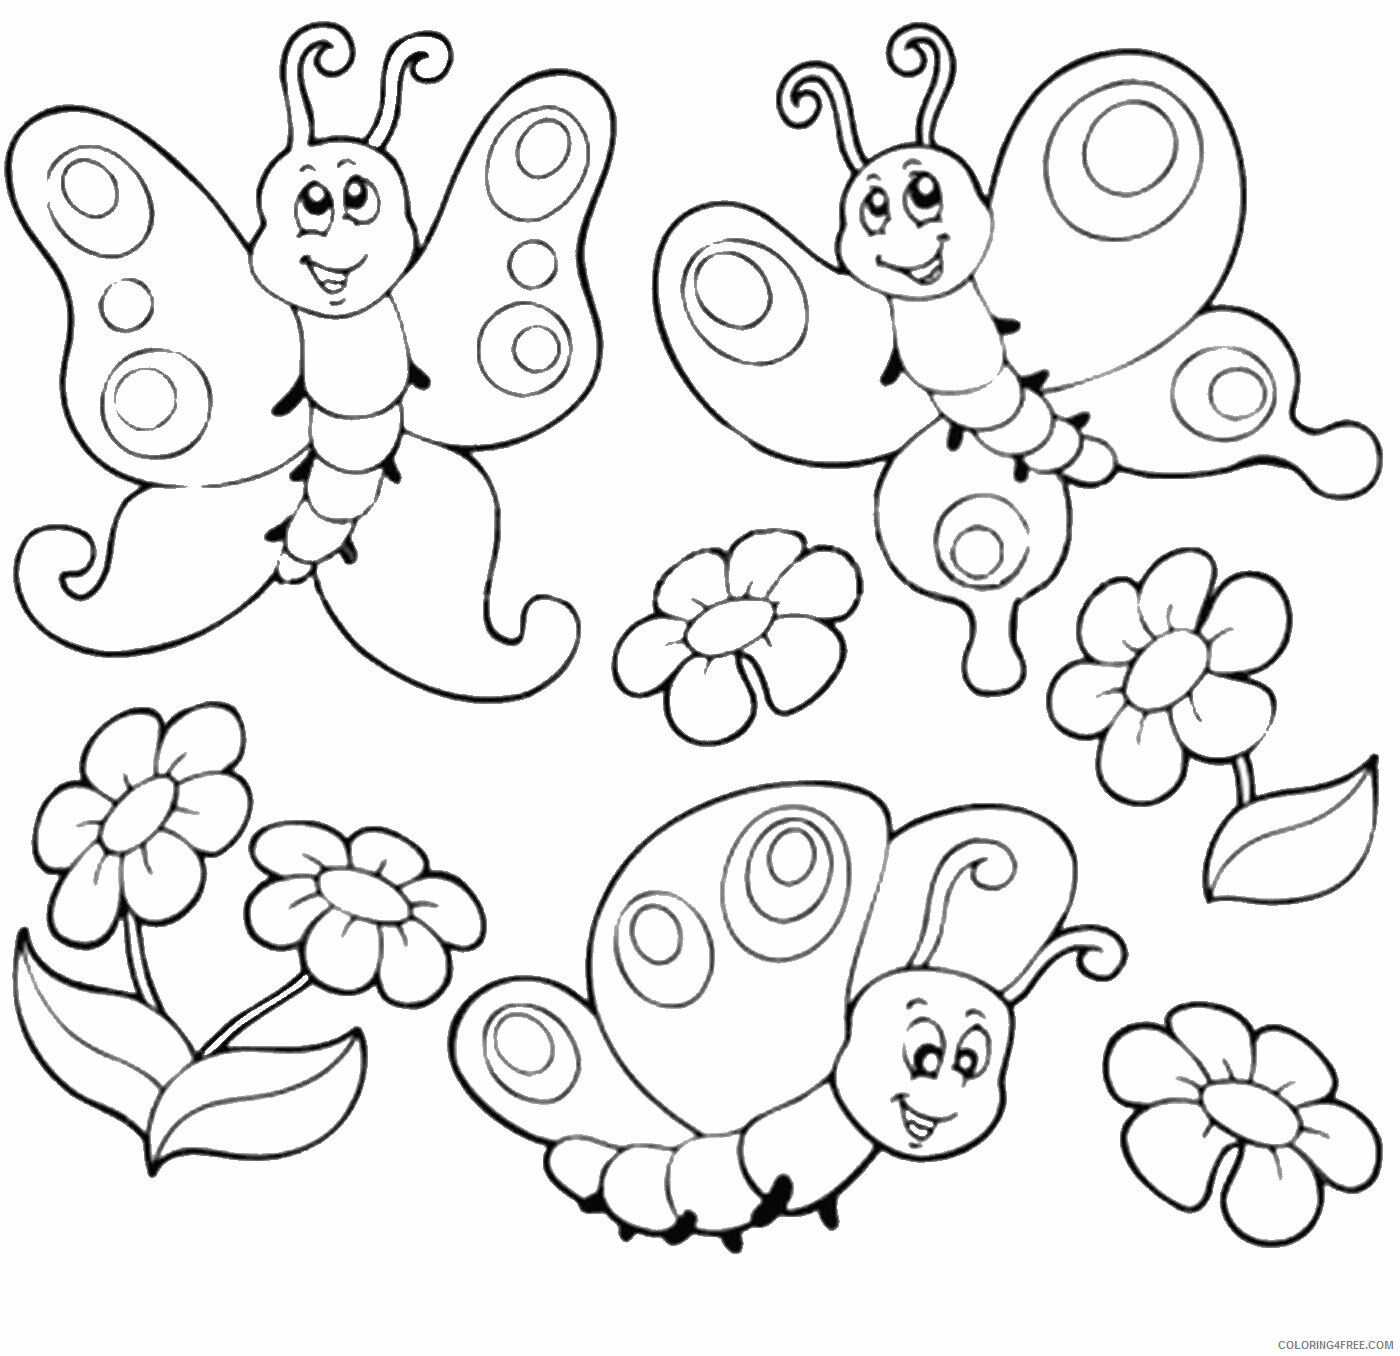 Butterfly Coloring Pages Animal Printable Sheets butterfly_cl_10 2021 0645 Coloring4free